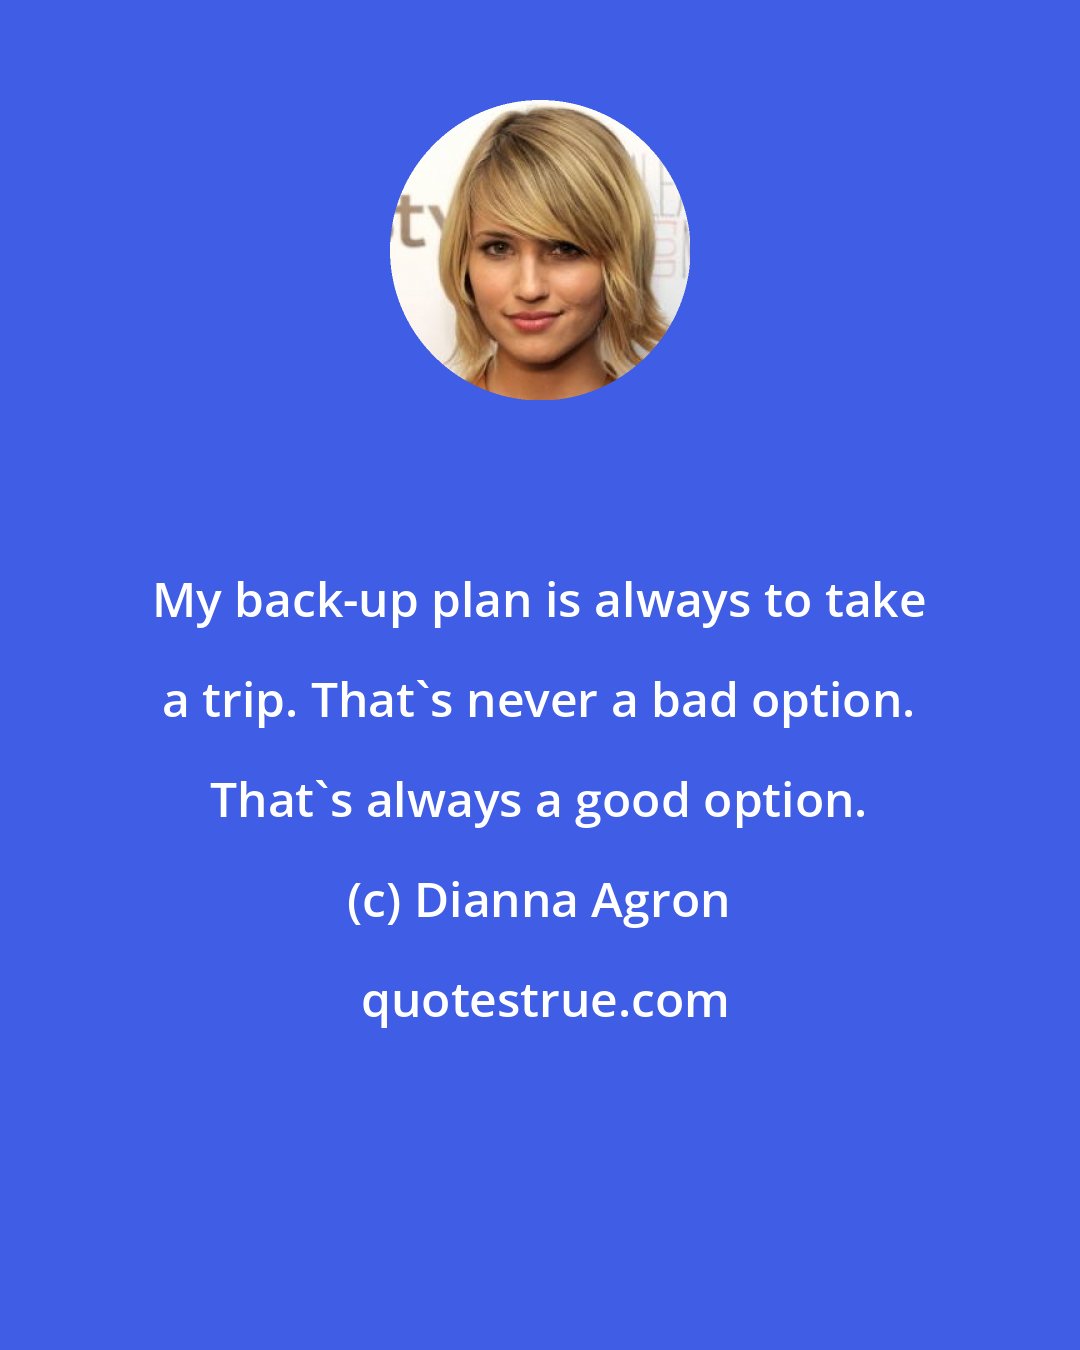 Dianna Agron: My back-up plan is always to take a trip. That's never a bad option. That's always a good option.